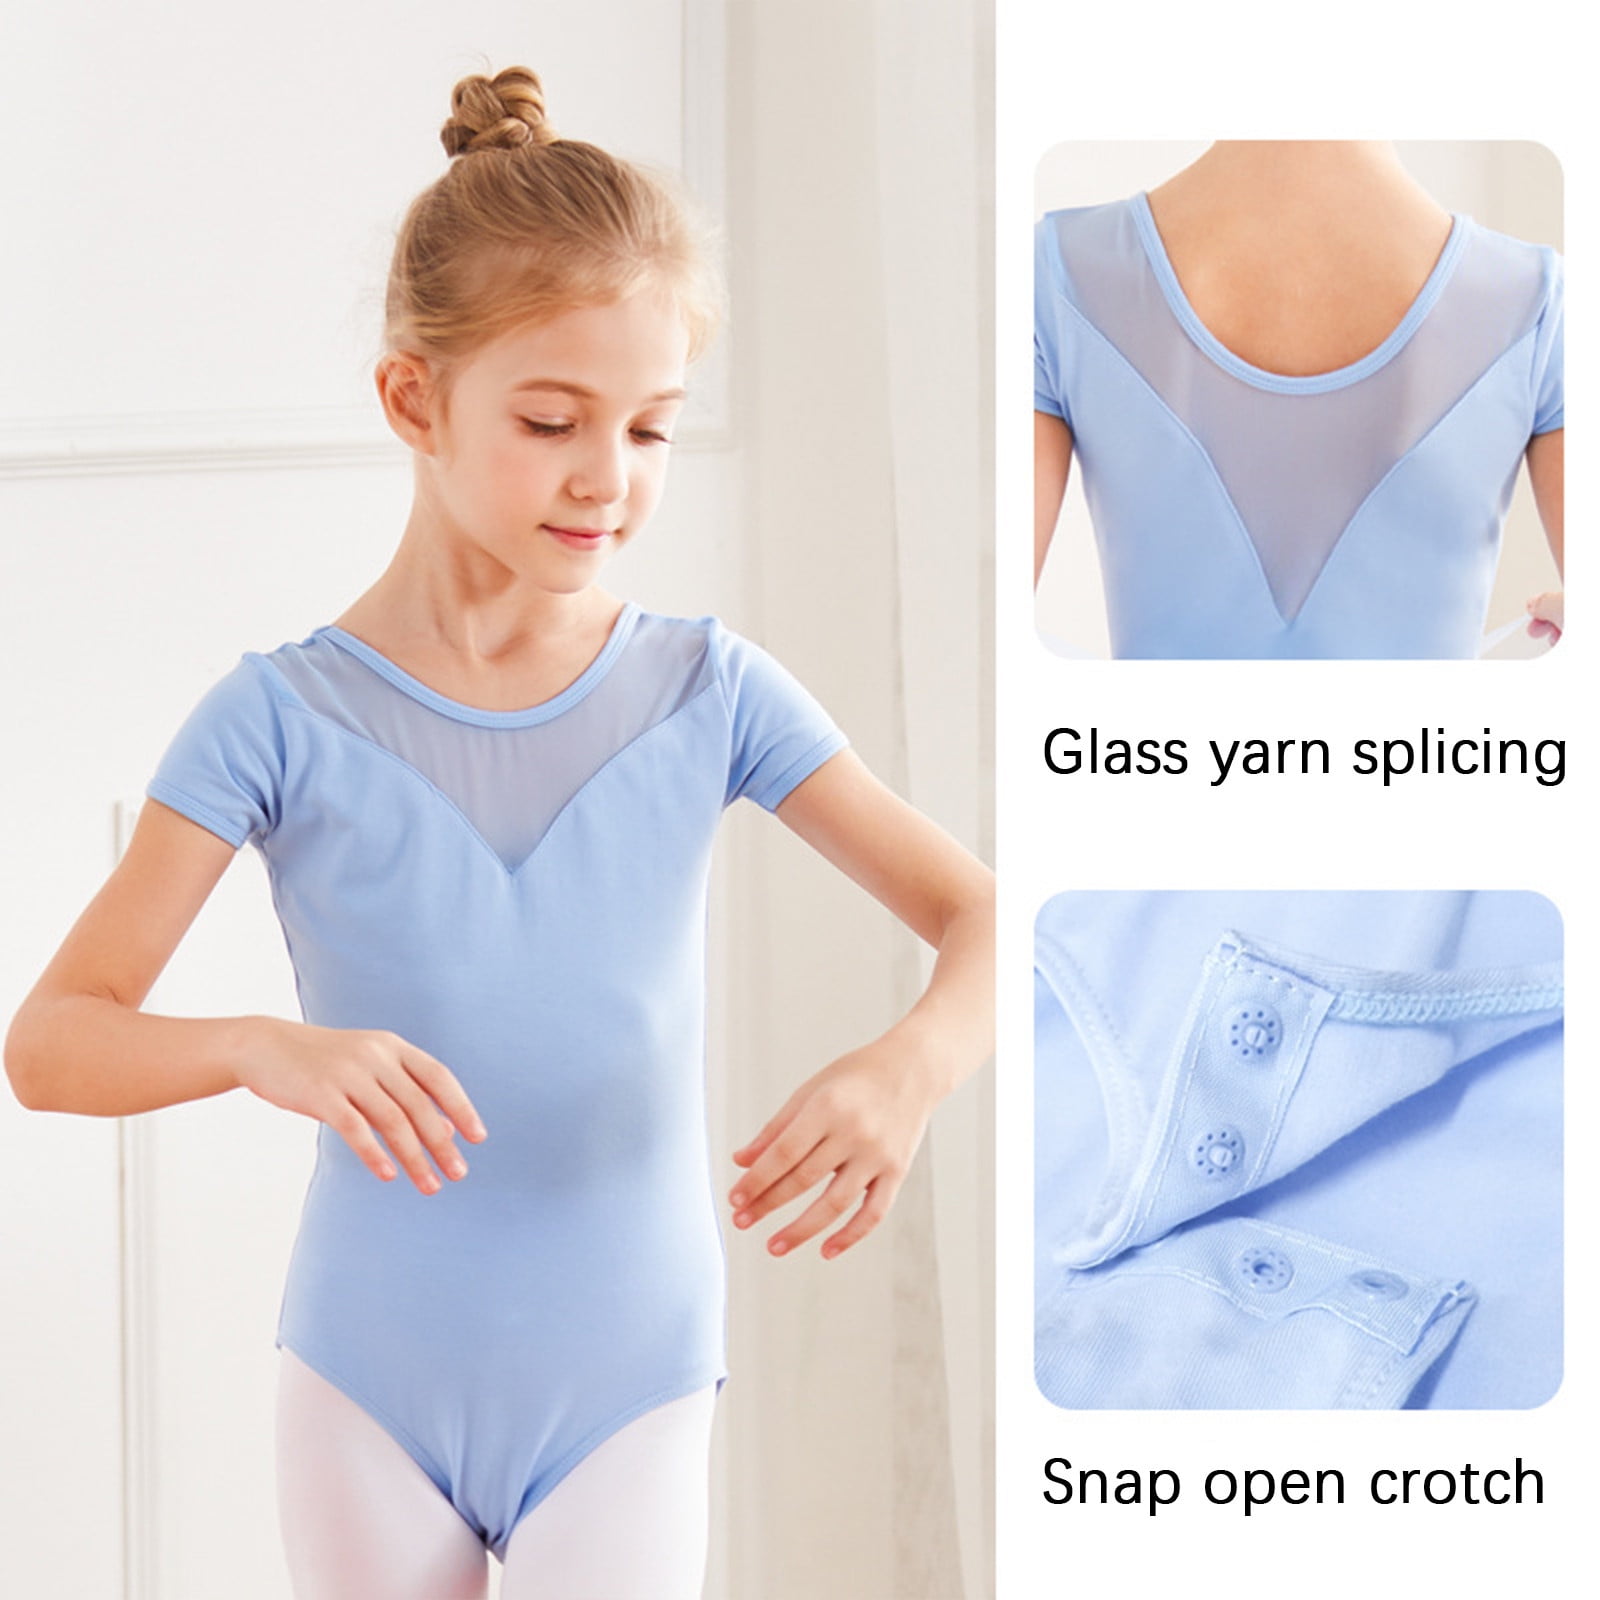 SDJMa Baby Girls Children's Dance Clothes Summer Long Sleeves Training  Clothes Ballet One-piece Performance Clothes Skirt Set 